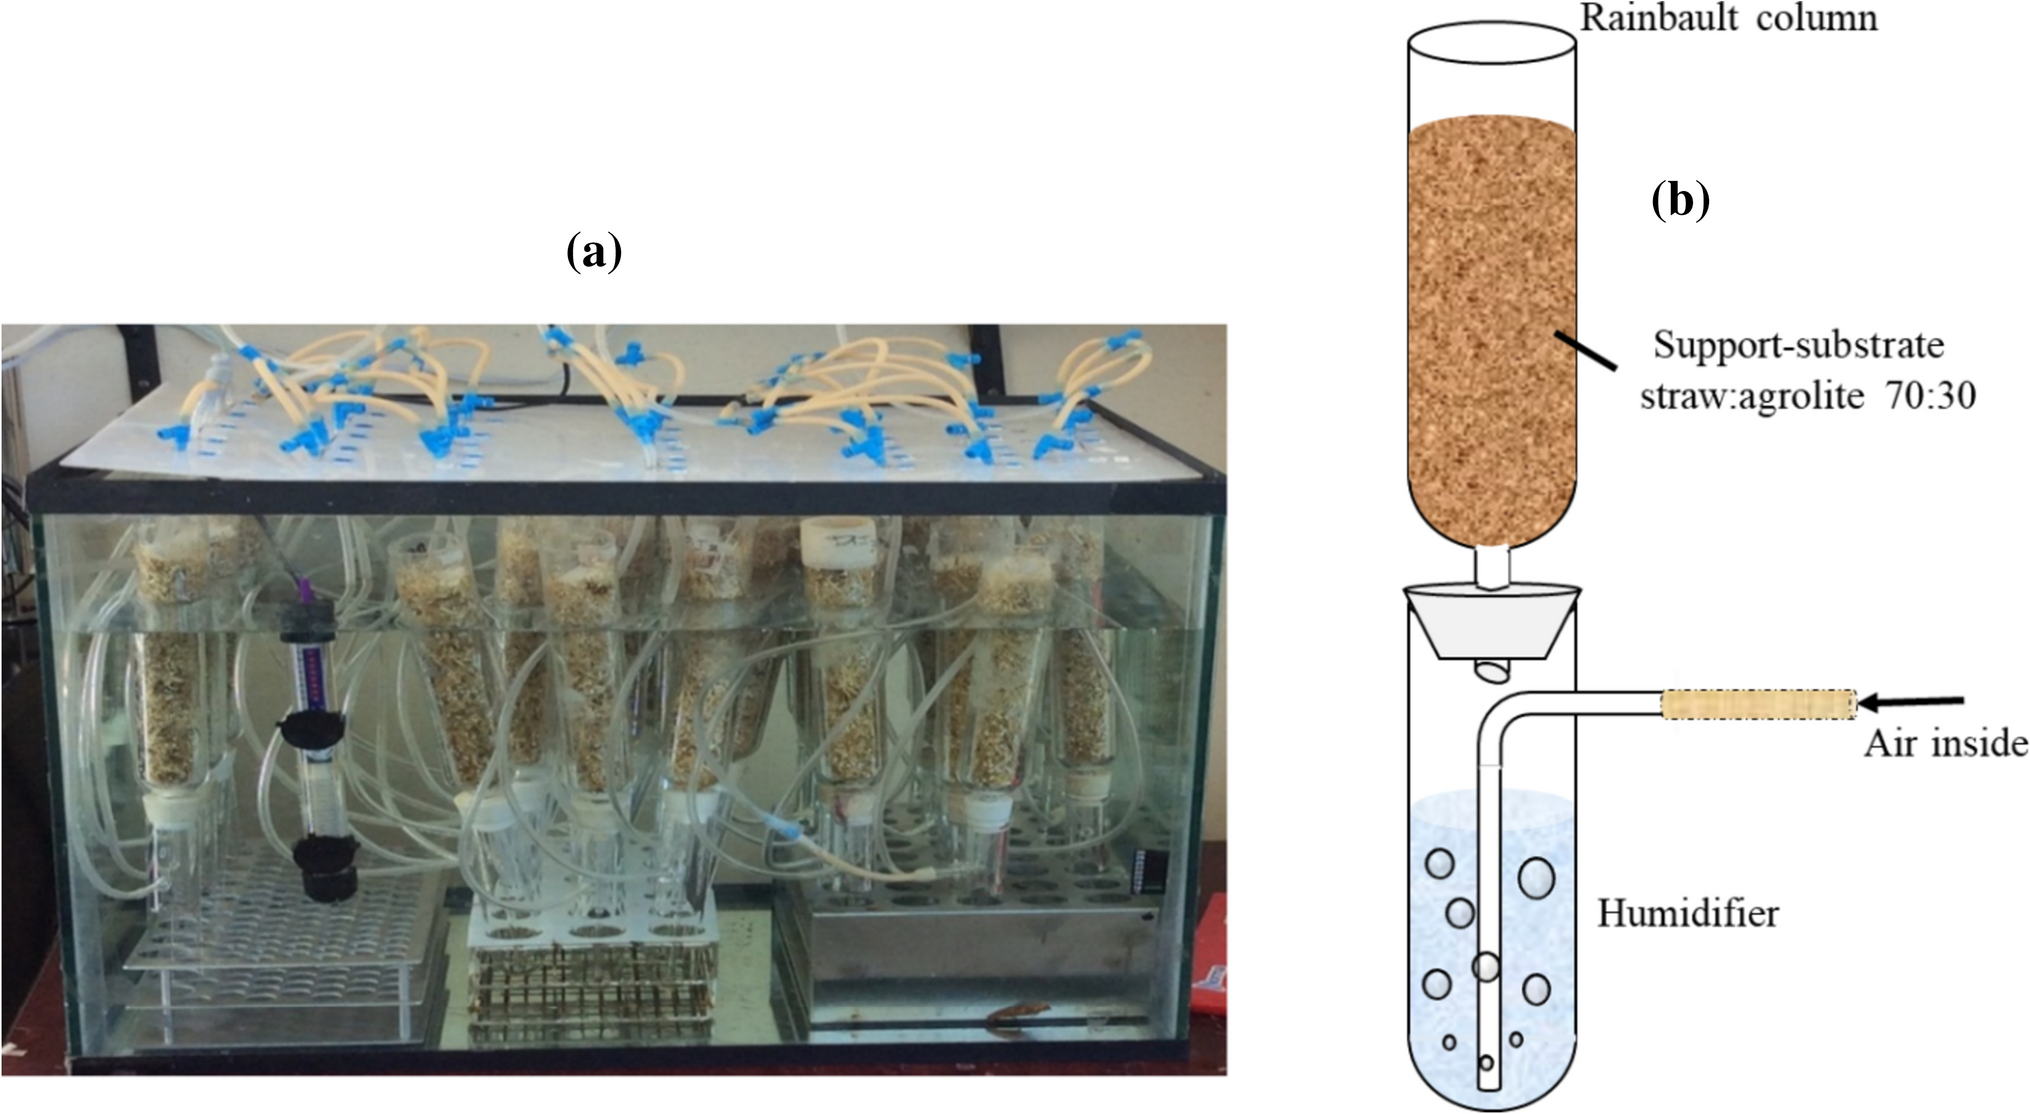 Performance evaluation of Trichoderma reseei in tolerance and biodegradation of diuron herbicide in agar plate, liquid culture and solid-state fermentation